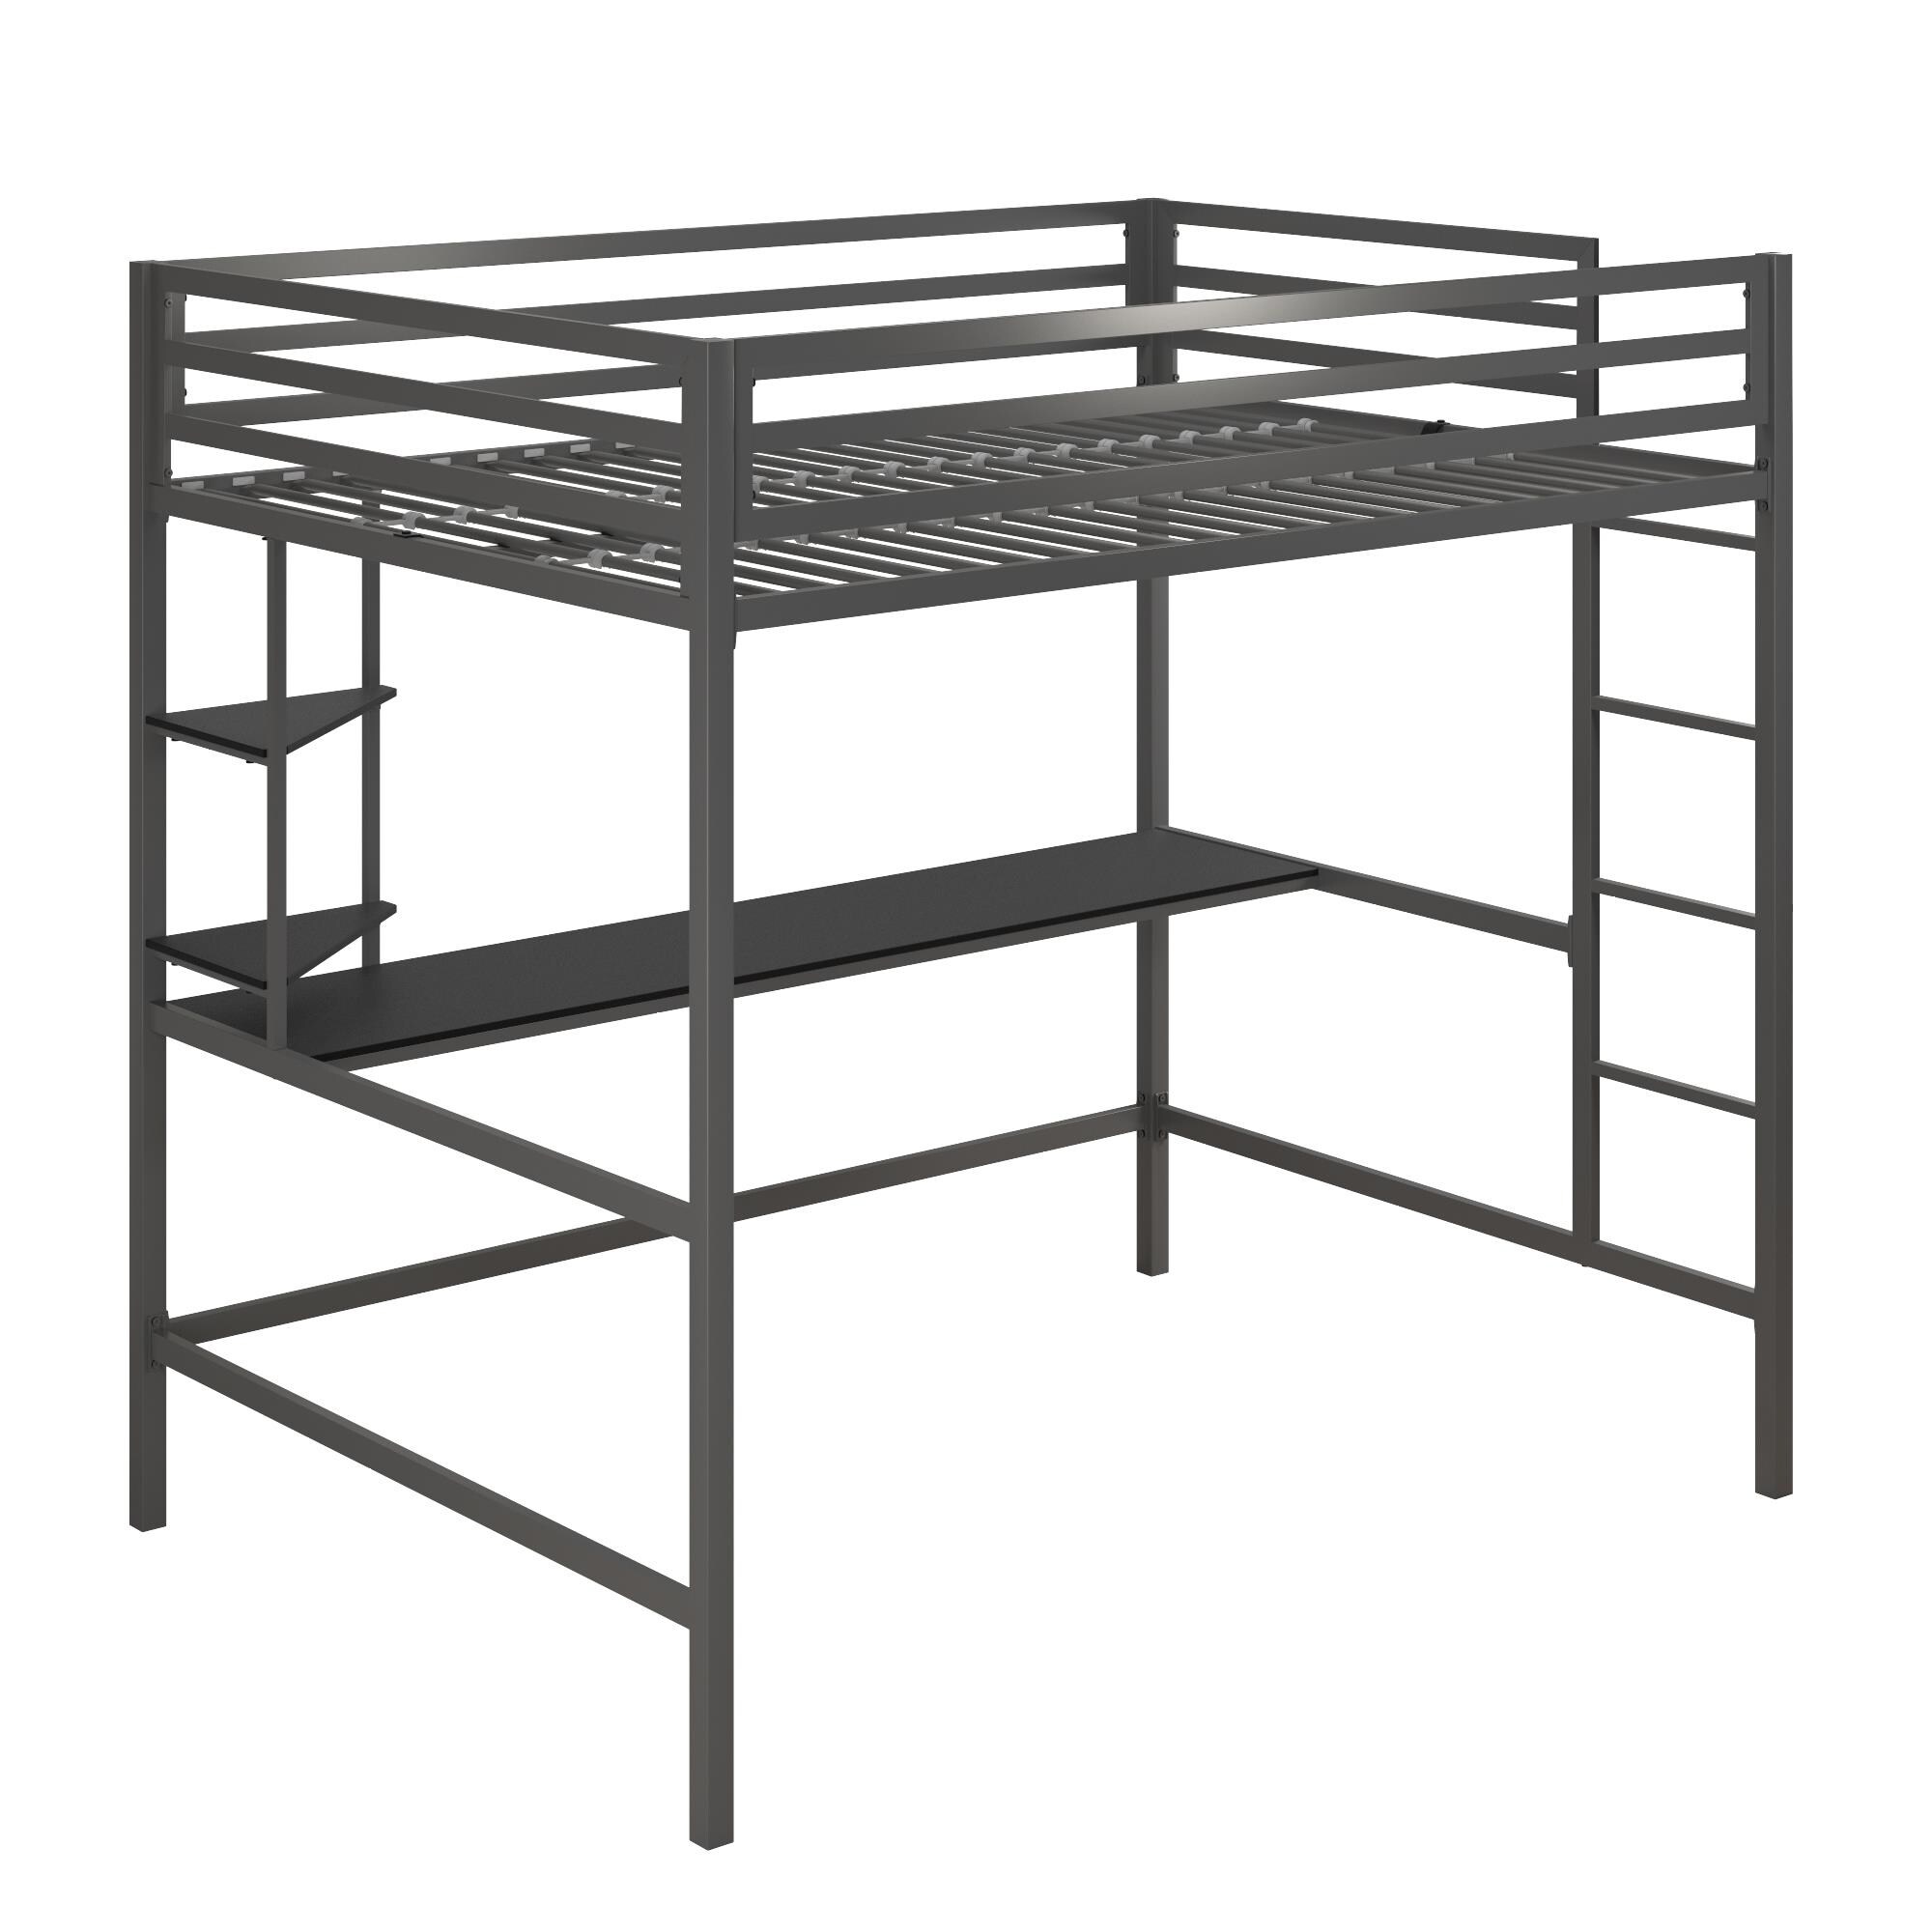 metal loft bed with desk and shelves